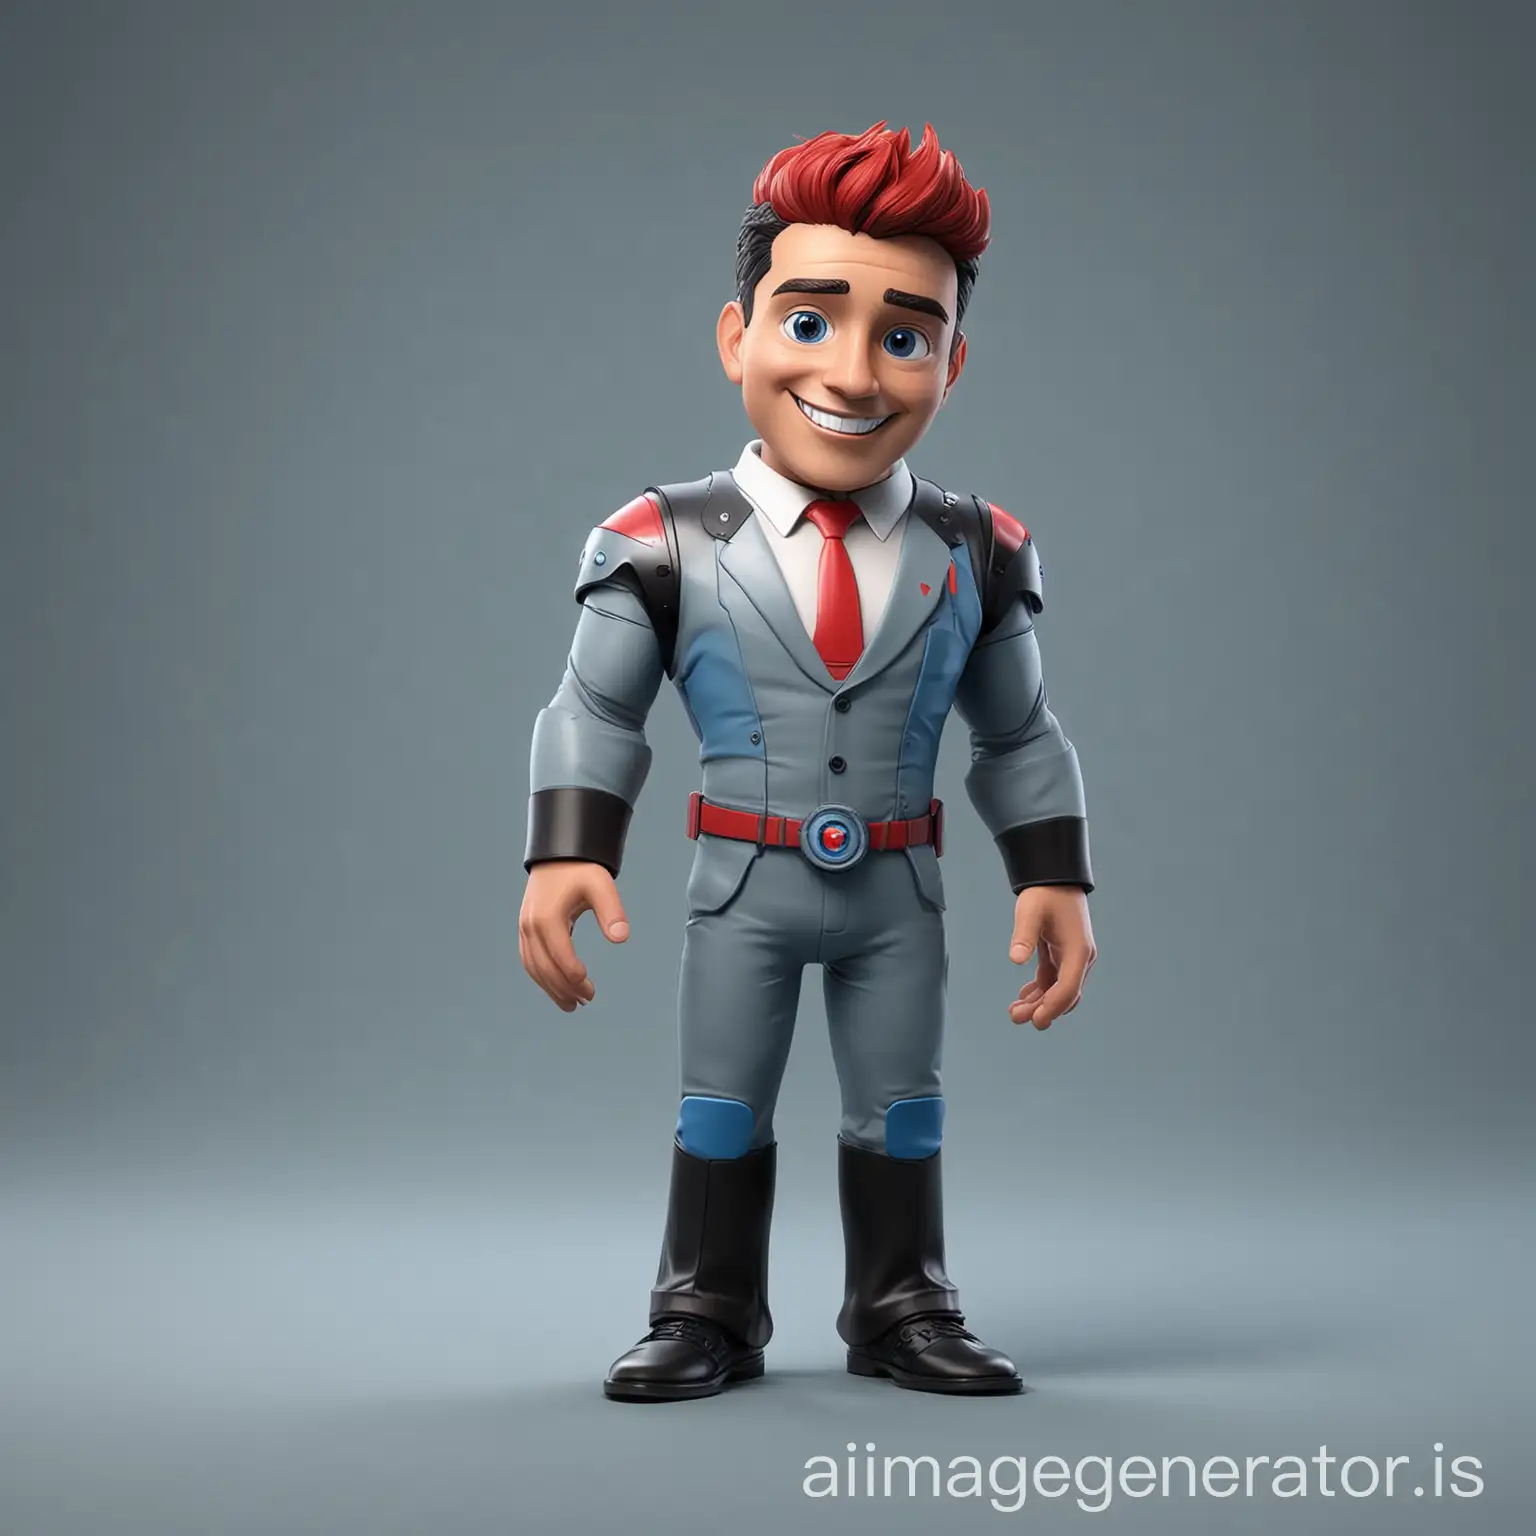 Fictional character, with technological and human characteristics, main figure of a digital marketing agency, friendly, happy, approachable, innovative, formal appearance, in color scheme gray, blue, red and black